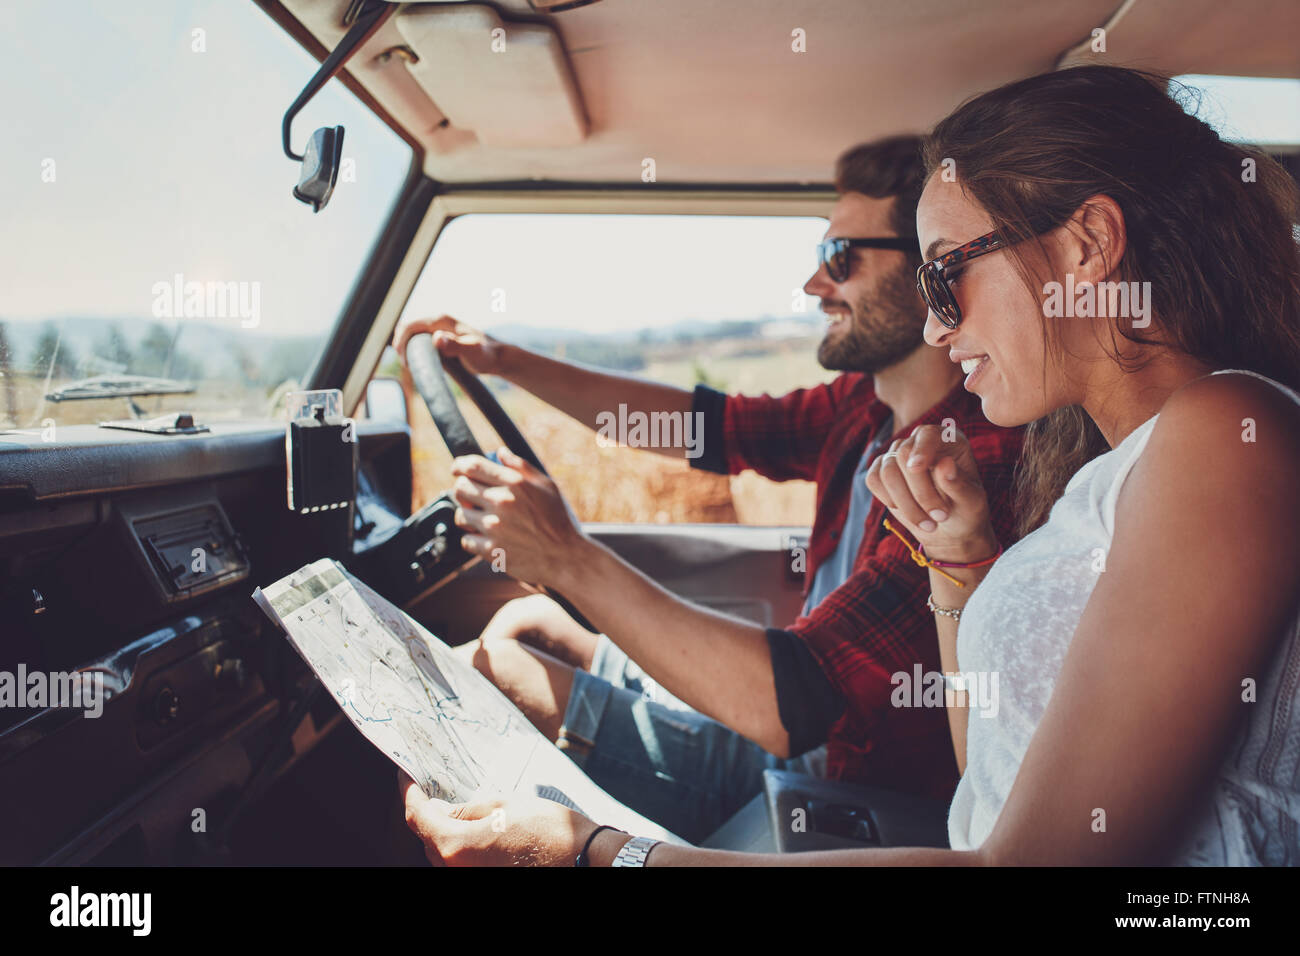 Side view of young couple using a map on a roadtrip for directions. Young man and woman reading a map while sitting in a car. Stock Photo